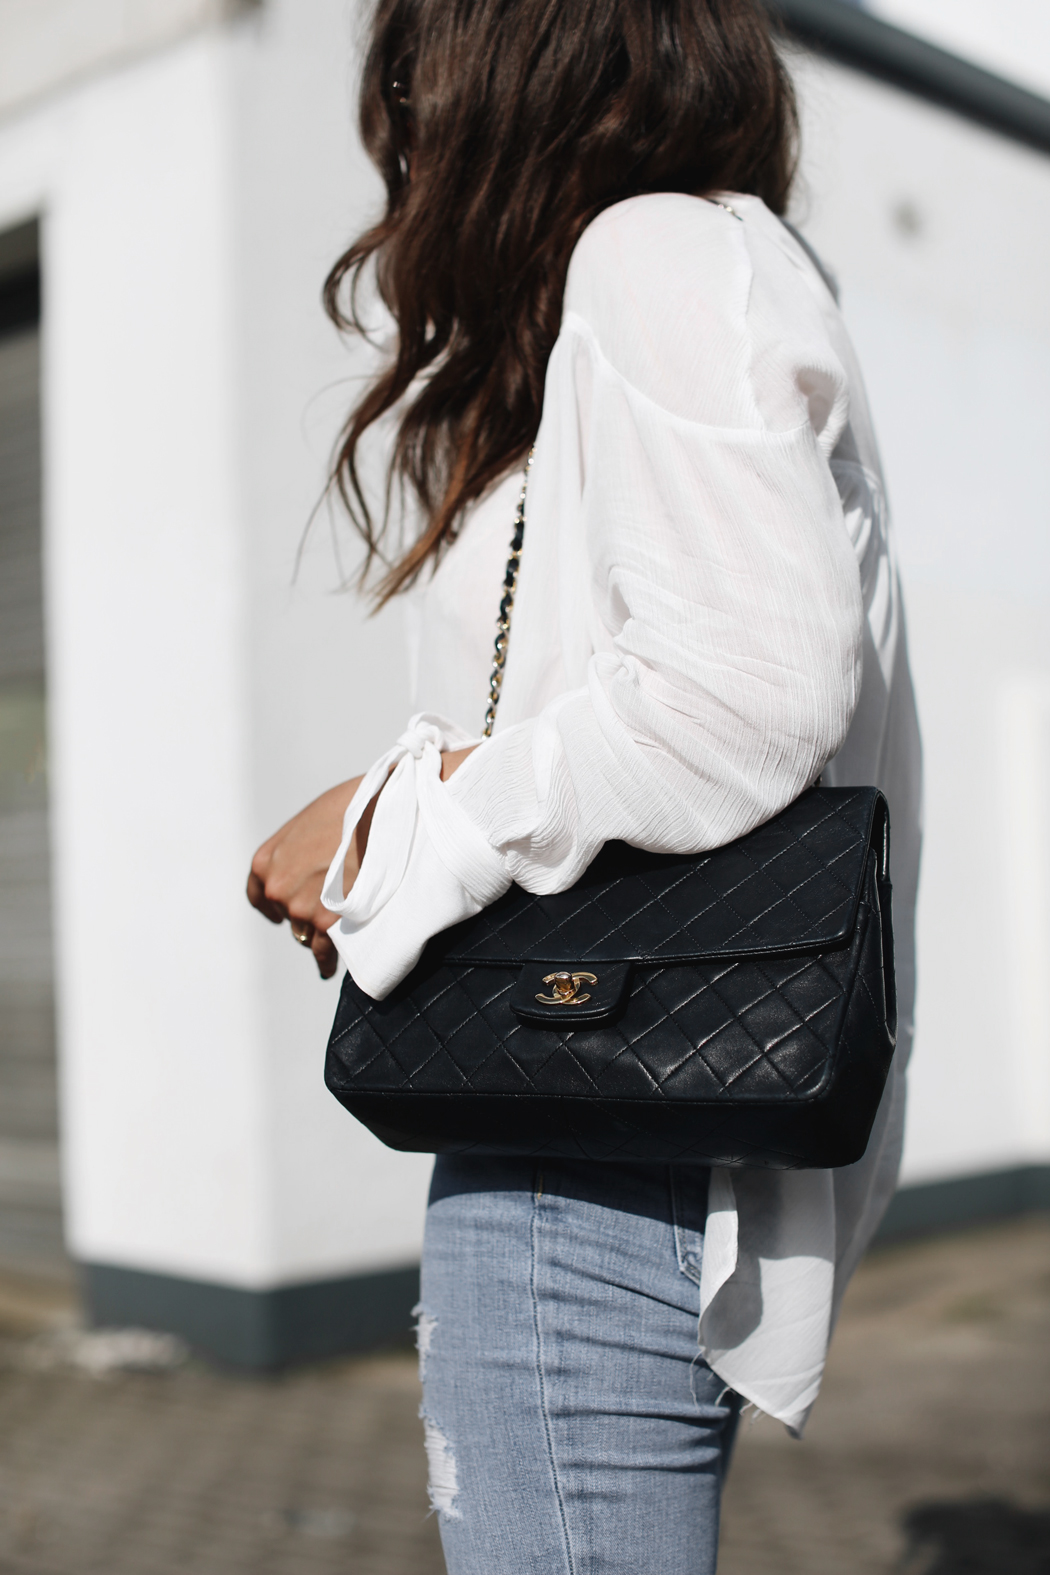 The Dashing Rider Chanel Bag Outfit